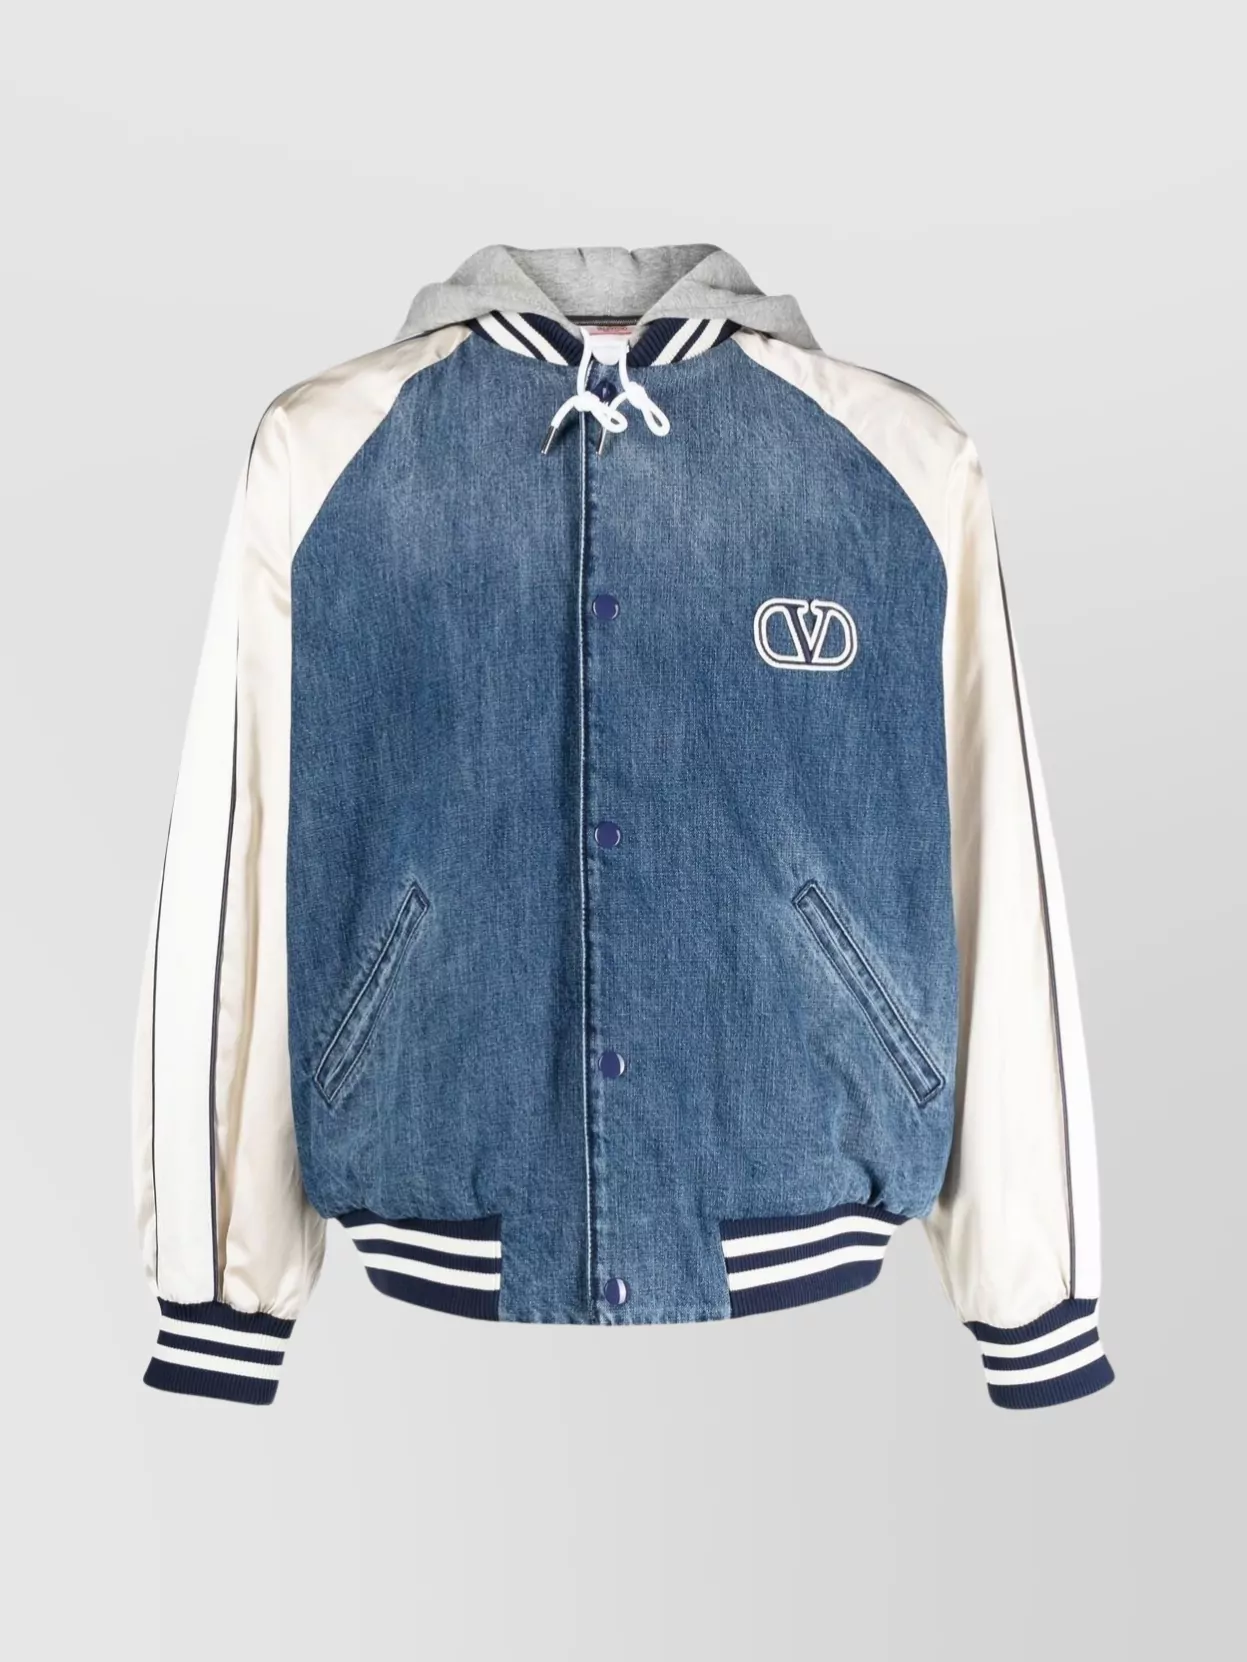 Valentino Denim Bomber Jacket With Satin Sleeves And Vlogo Signature Patch In Blue